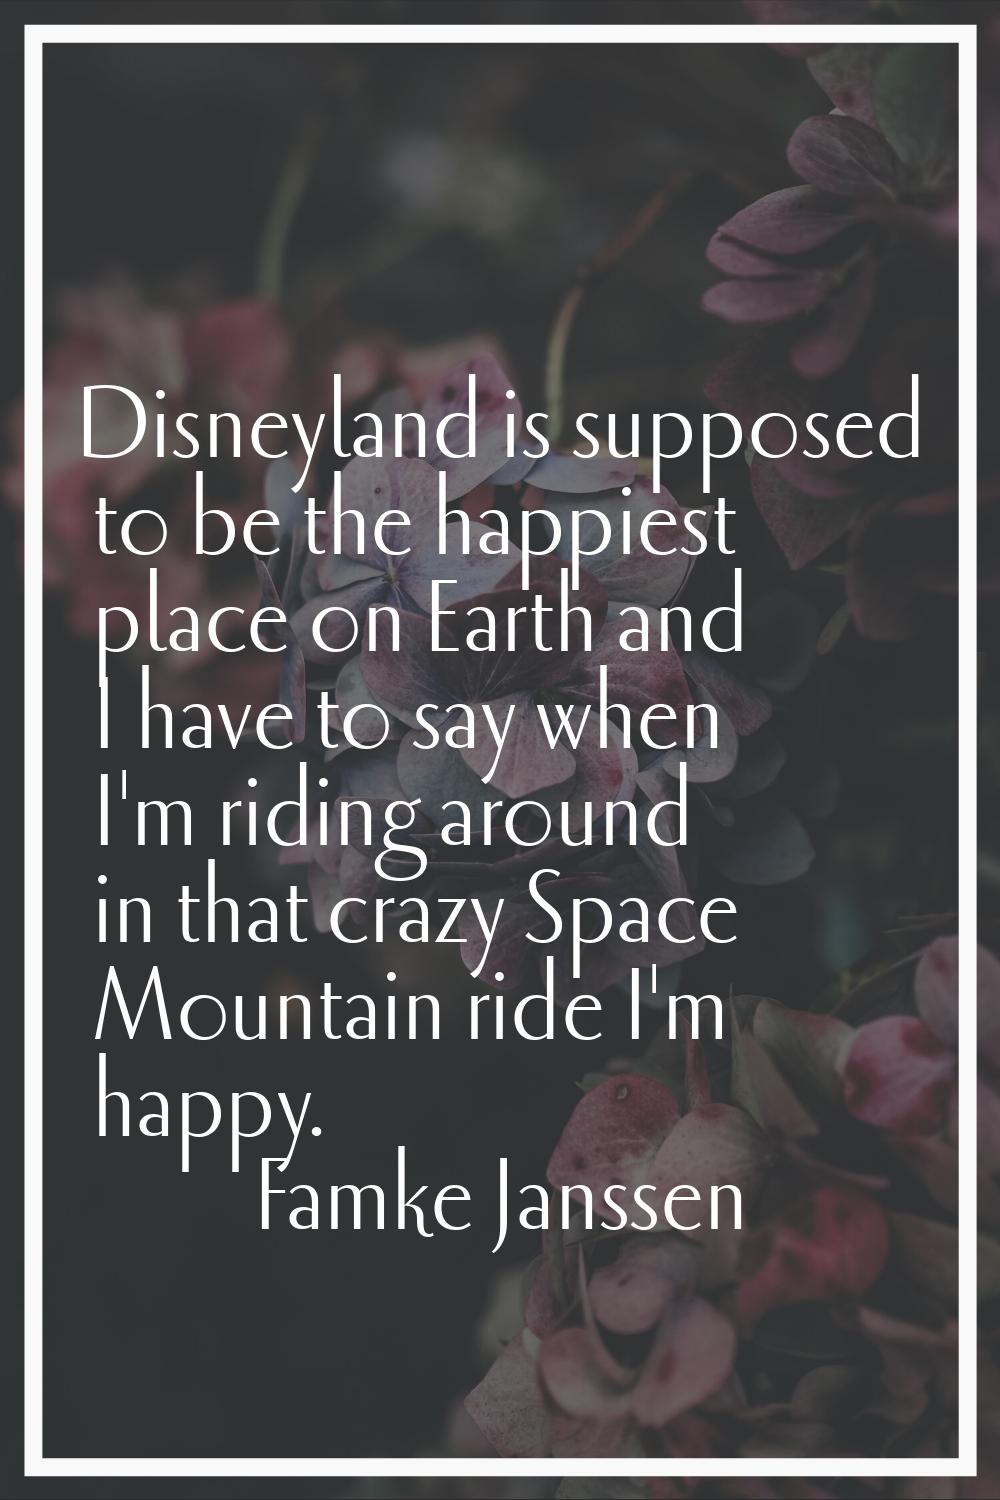 Disneyland is supposed to be the happiest place on Earth and I have to say when I'm riding around i